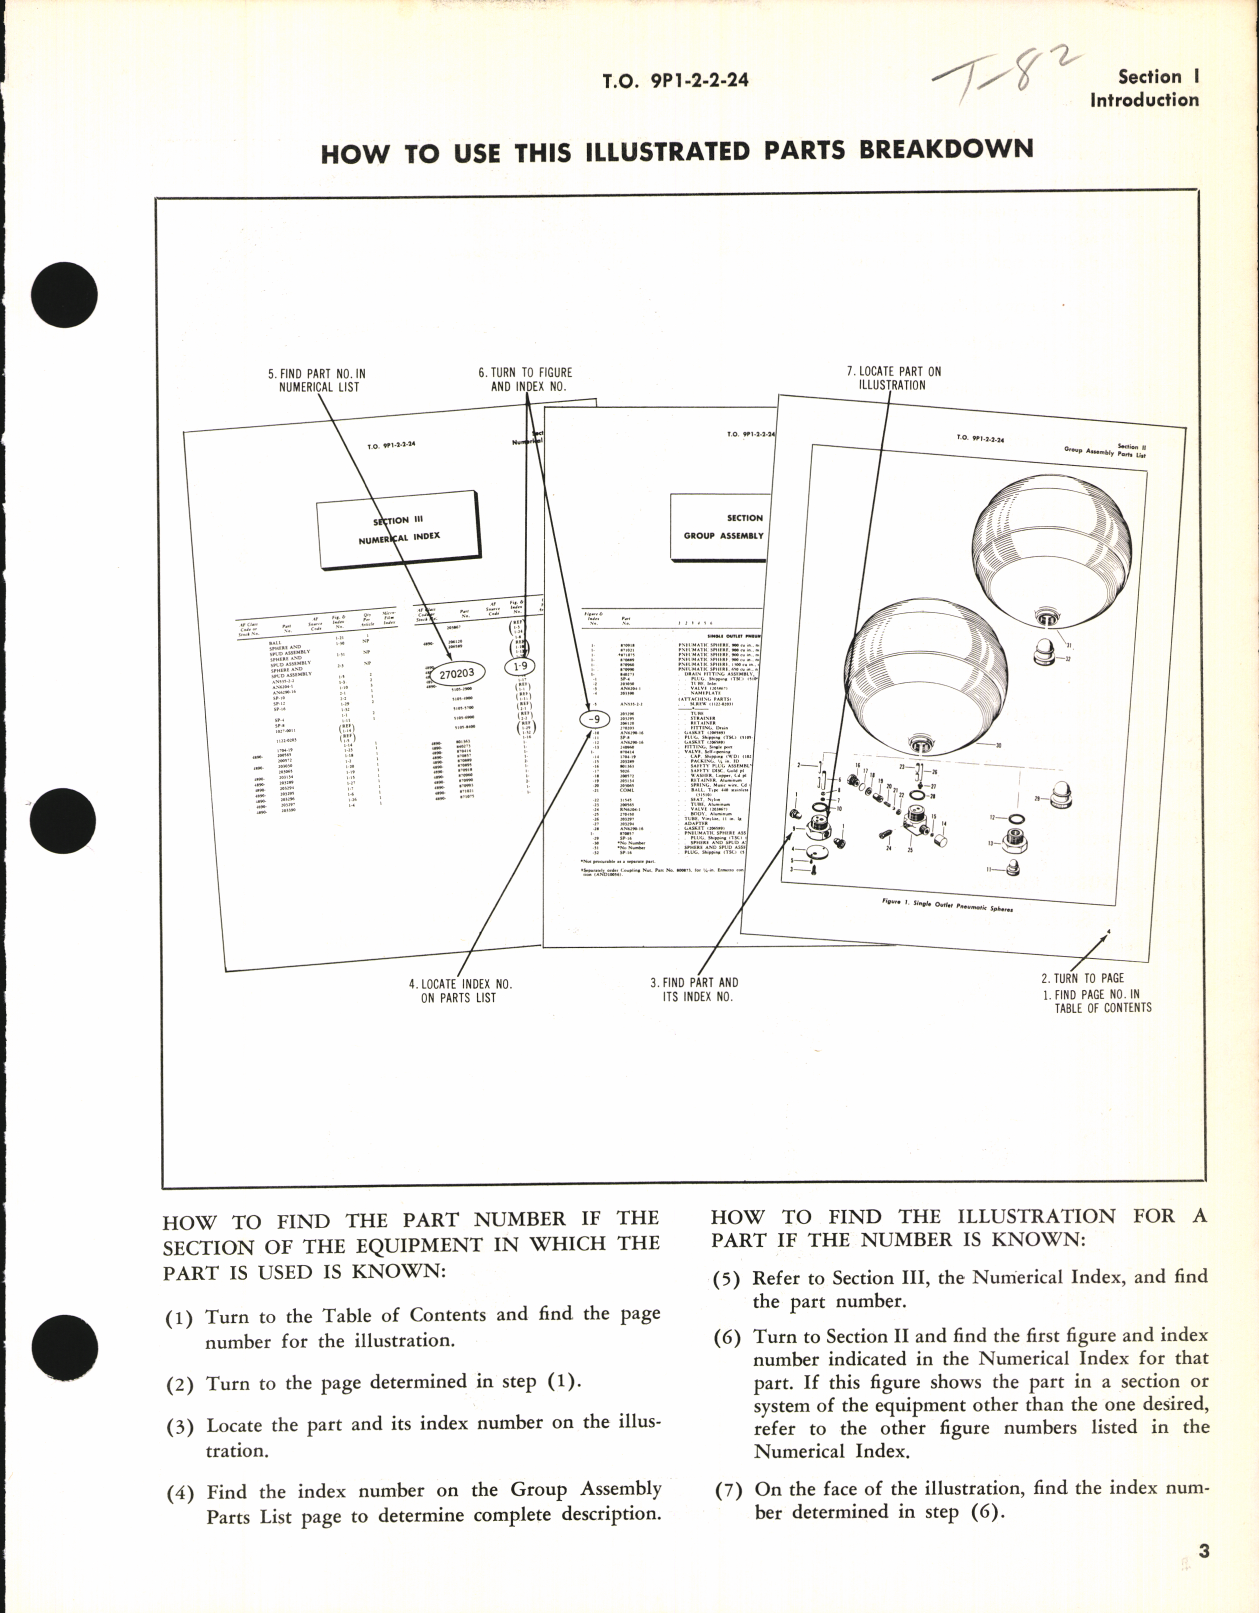 Sample page 7 from AirCorps Library document: Illustrated Parts Breakdown for Single Outlet Pneumatic Spheres and Double Outlet Pneumatic Spheres 